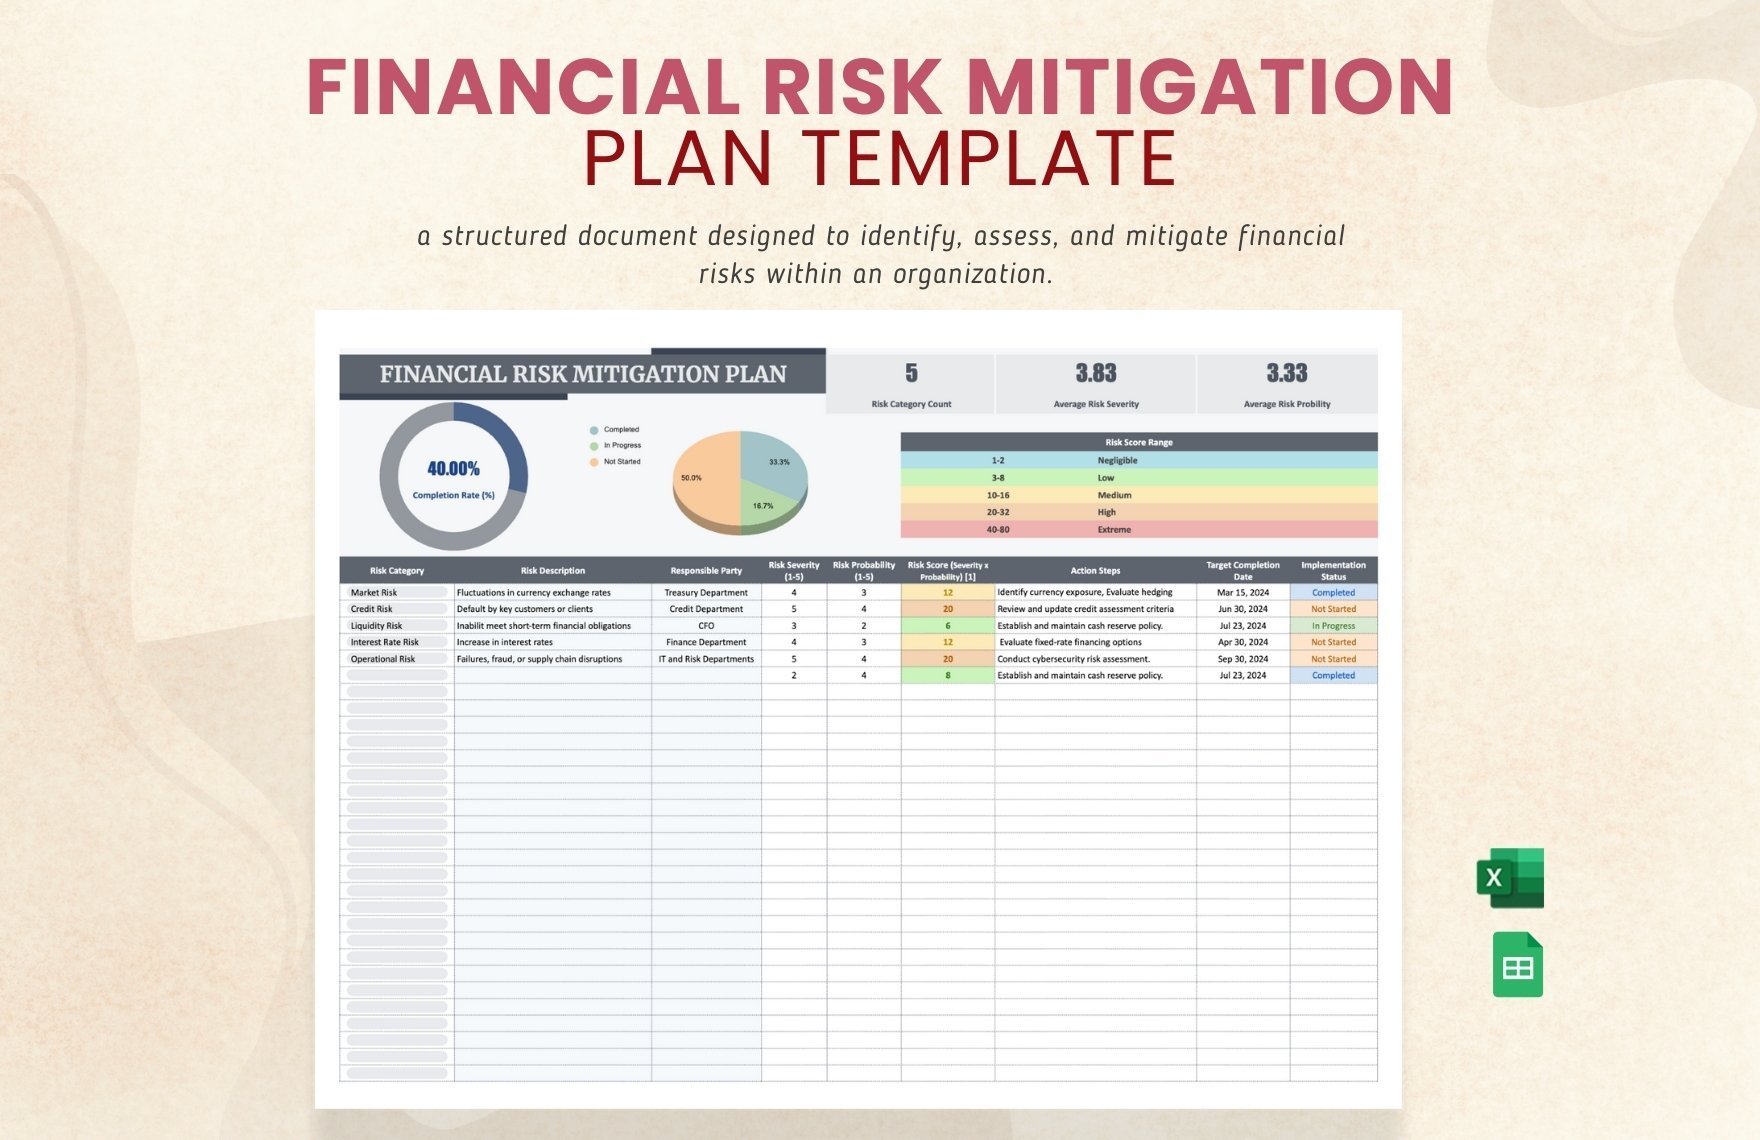 Financial Risk Mitigation Plan Template in Excel, Google Sheets